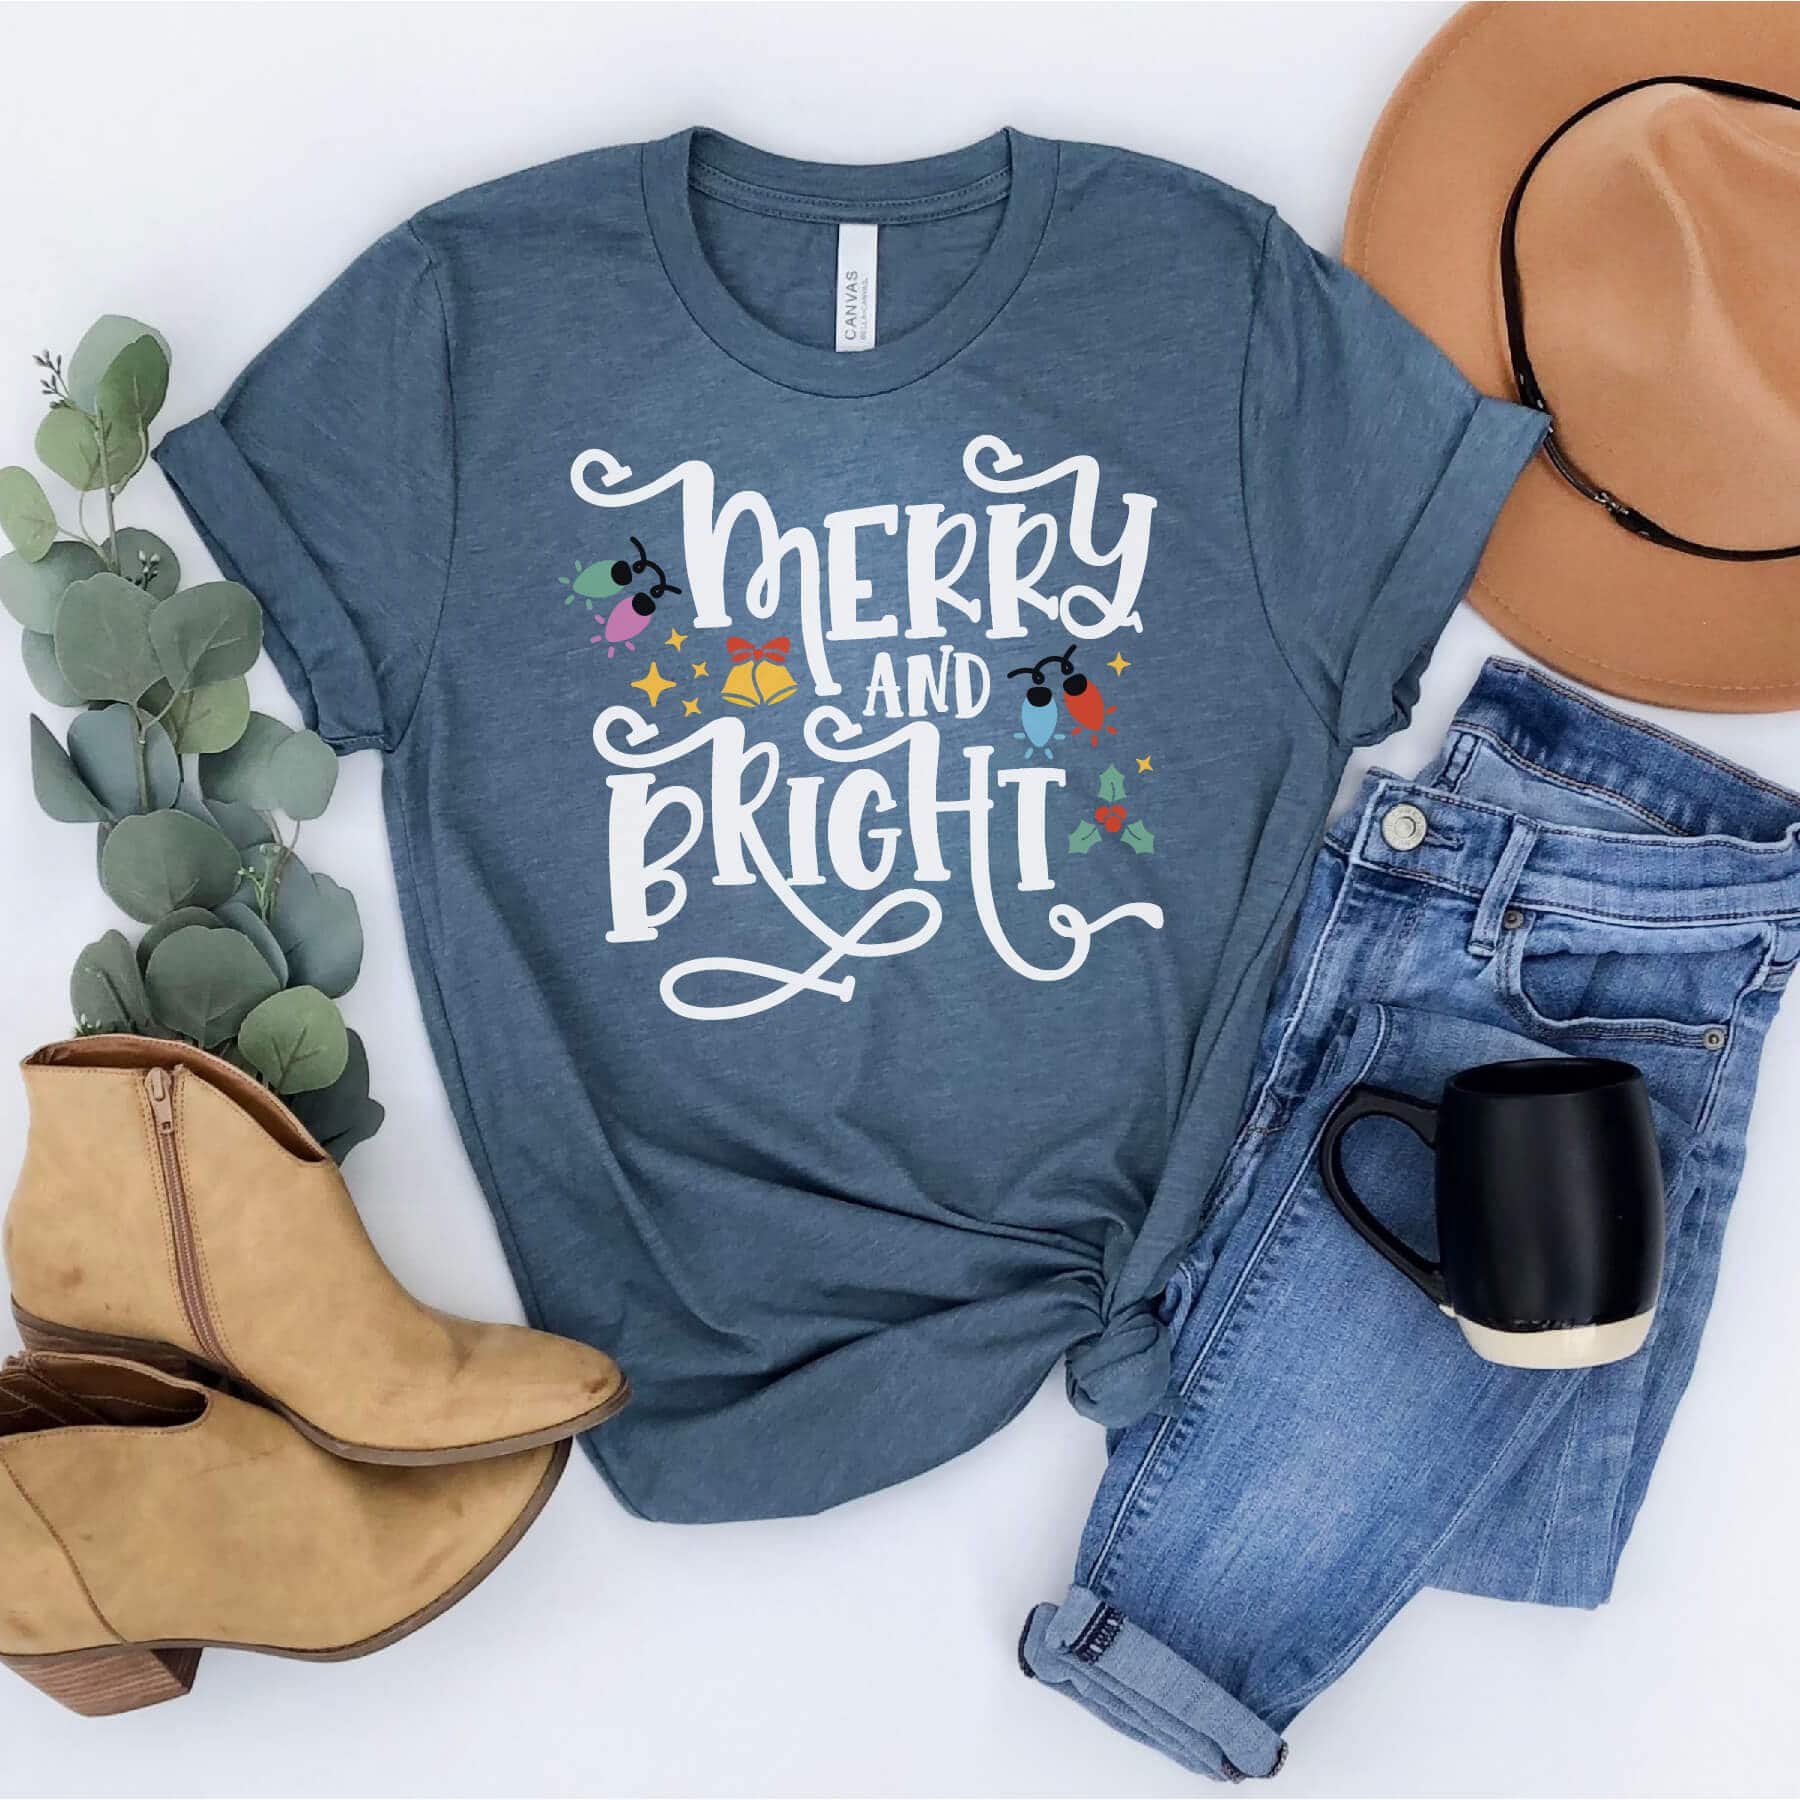 Christmas t-shirt with phrase "Merry and Bright" surrounded by Christmas lights, bells and stars.